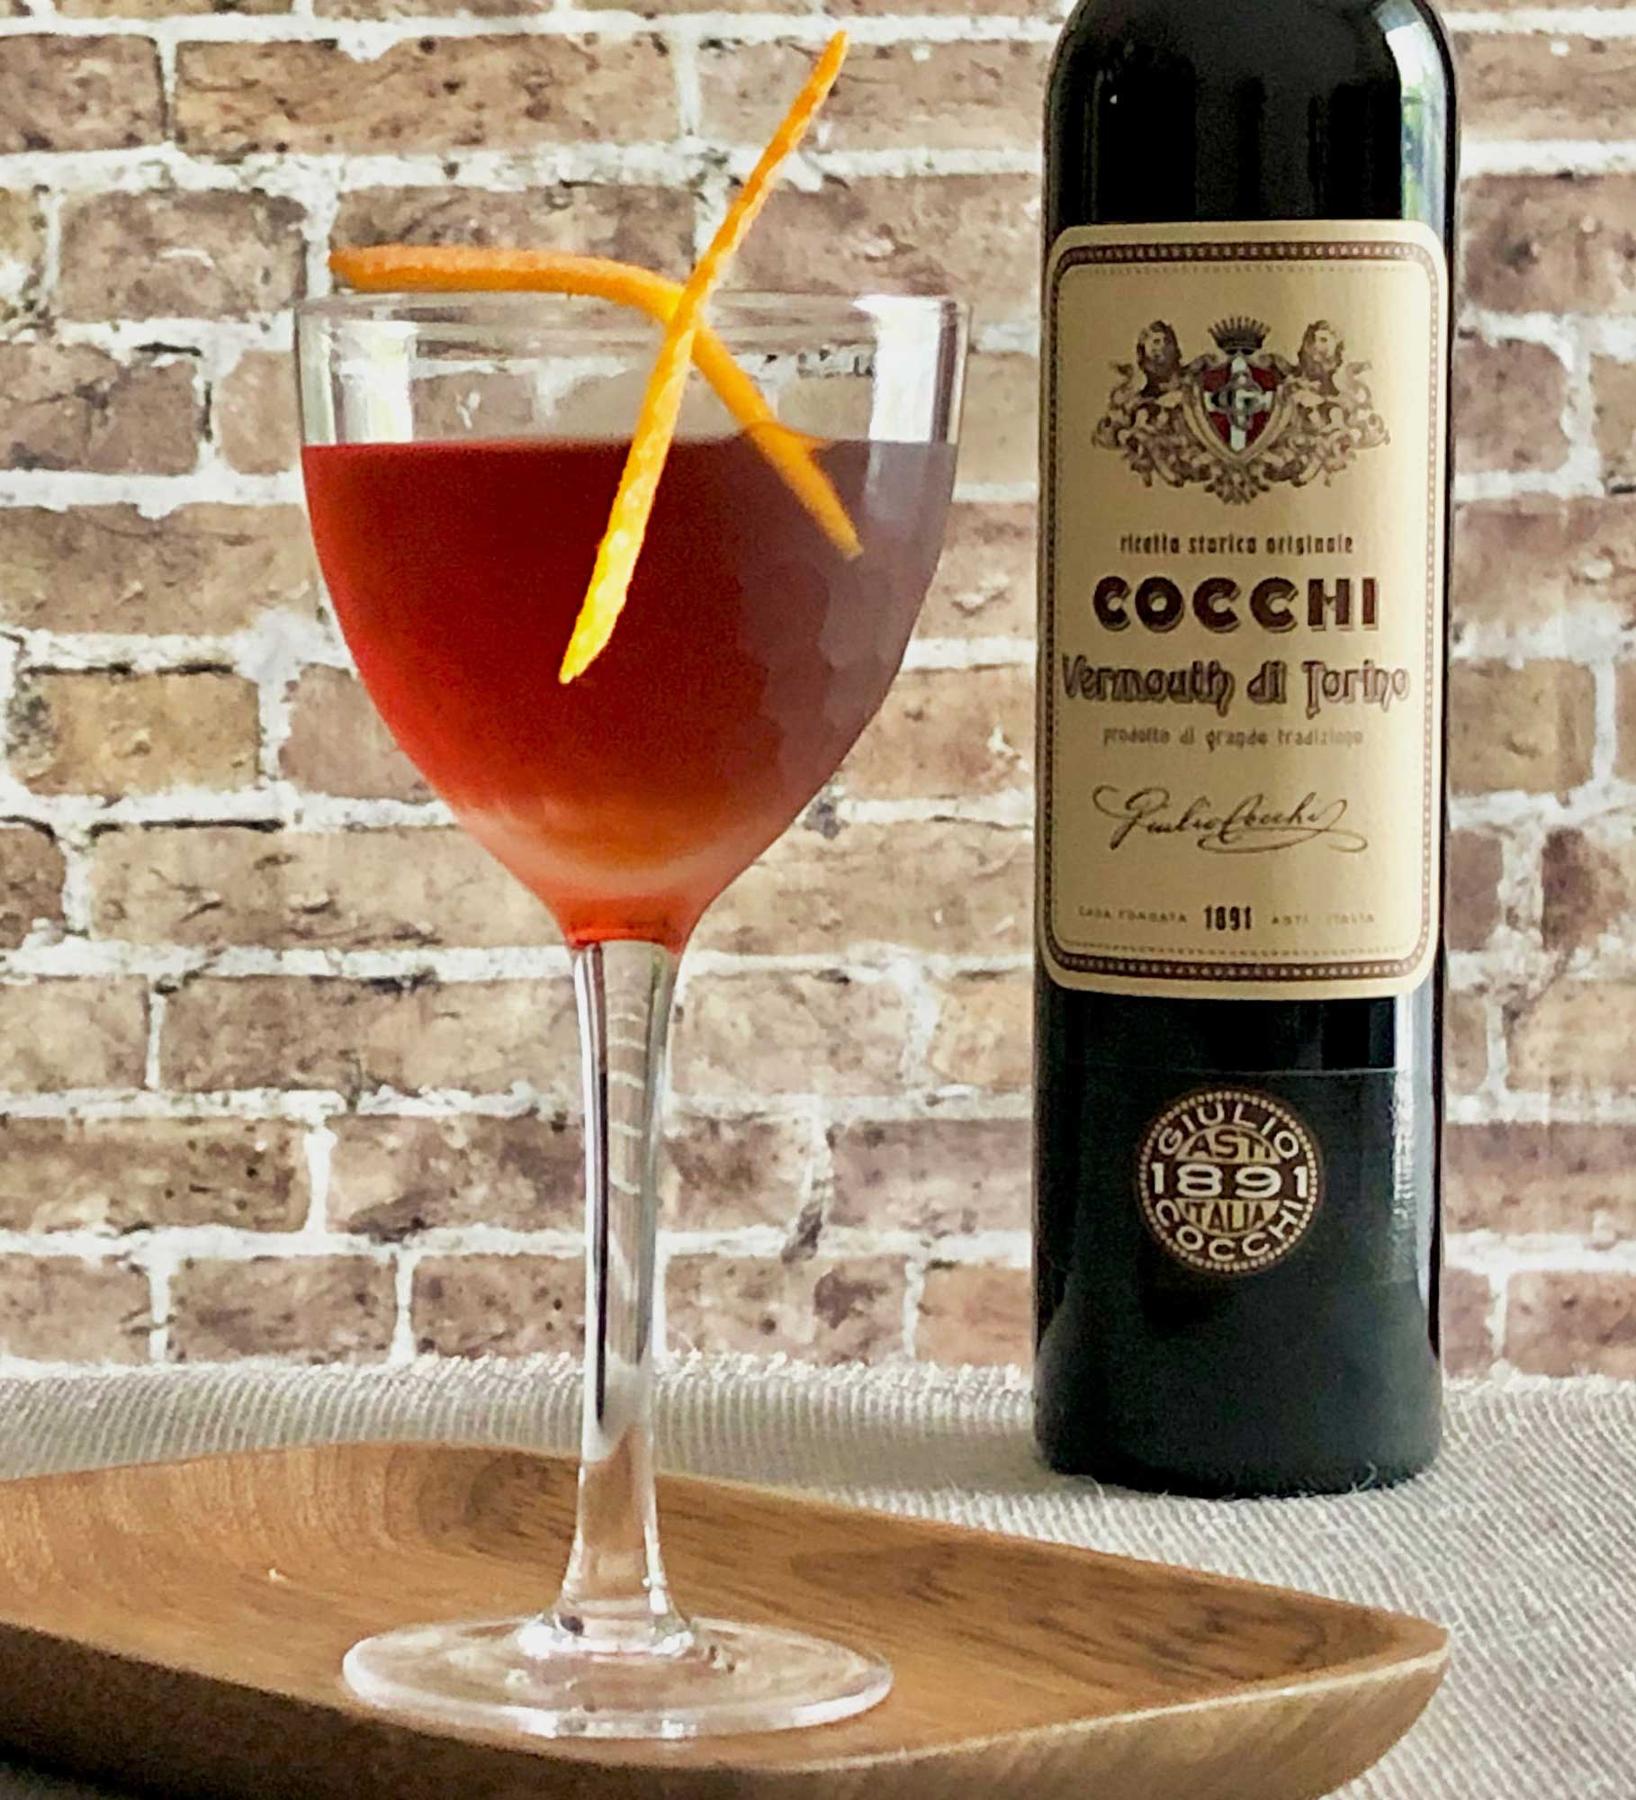 An example of the Golden Grove, the mixed drink (drink) featuring Cocchi Vermouth di Torino ‘Storico’, Smith & Cross Traditional Jamaica Rum, maraschino liqueur, orange bitters, and orange twist; photo by Lee Edwards